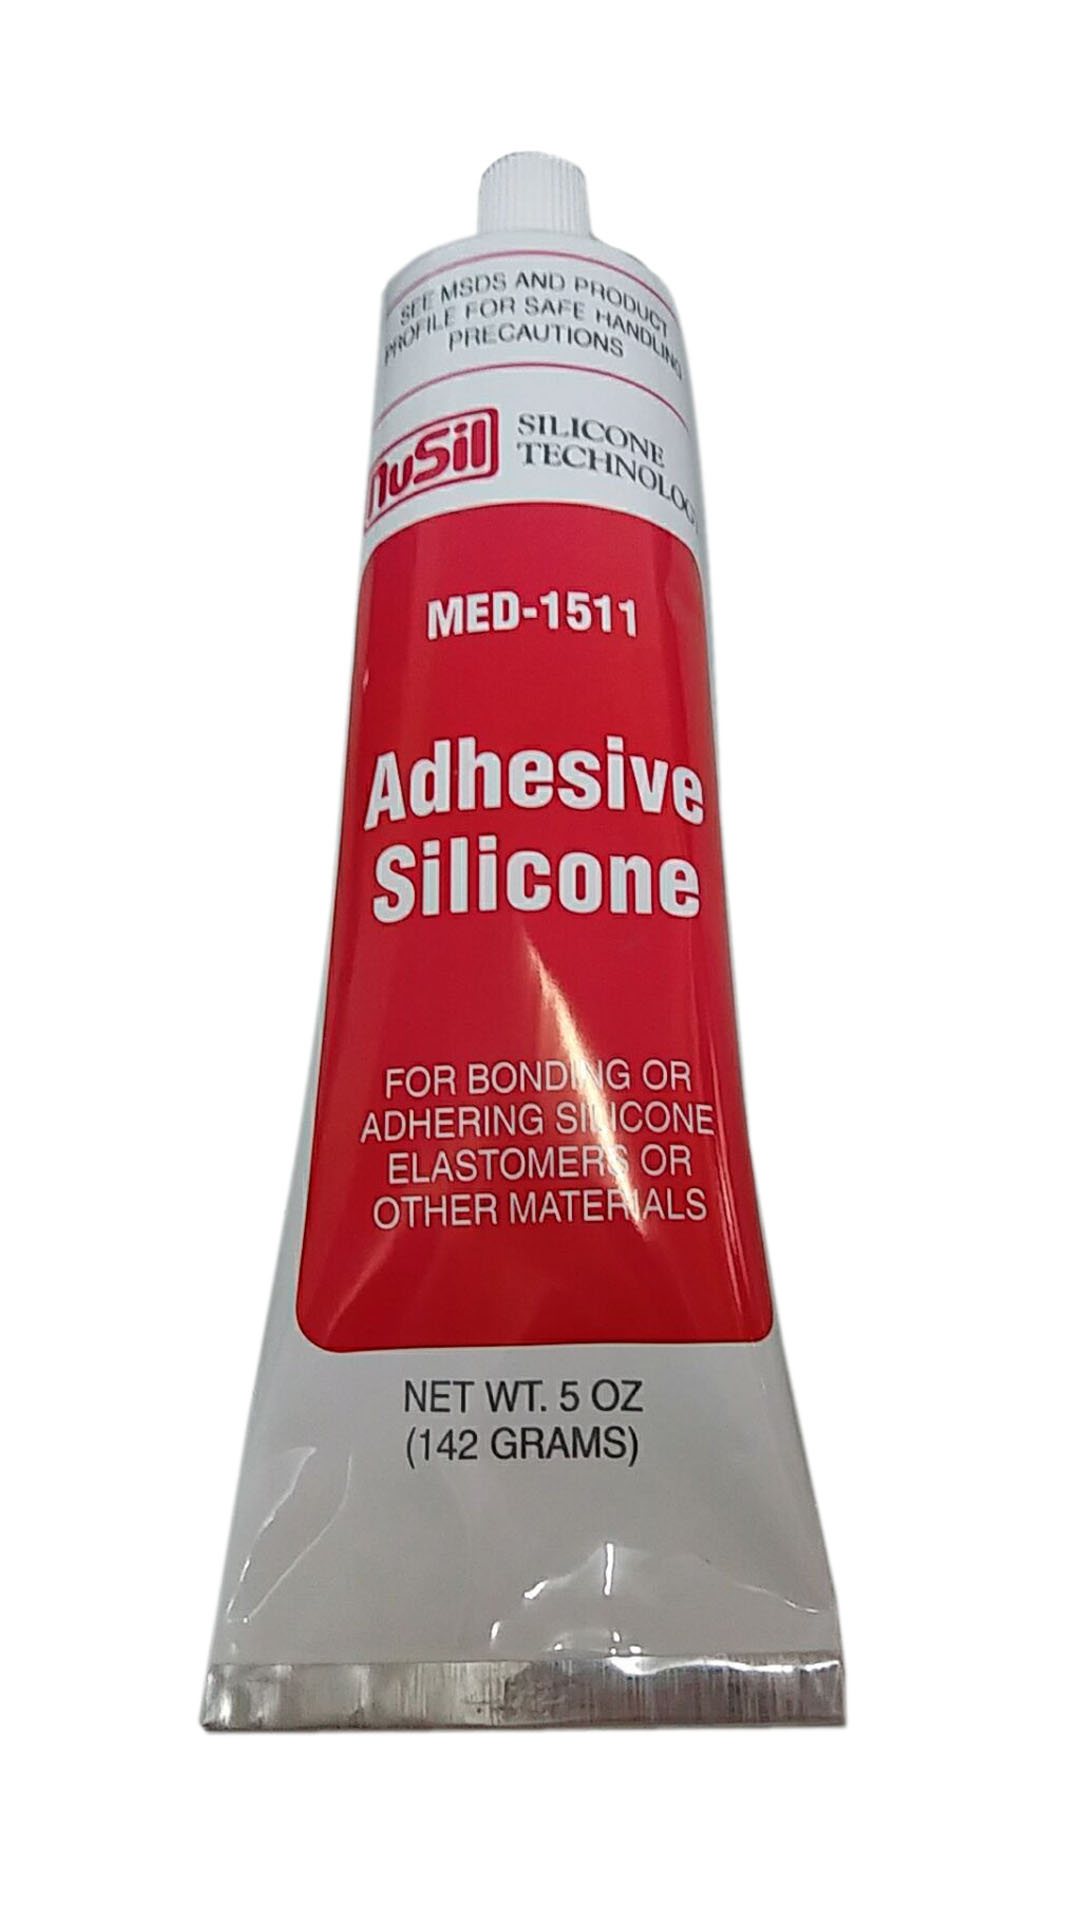   Nusil MED-1511 SILICONE ADHESIVE   硅胶粘接剂| Nusil MED-1511